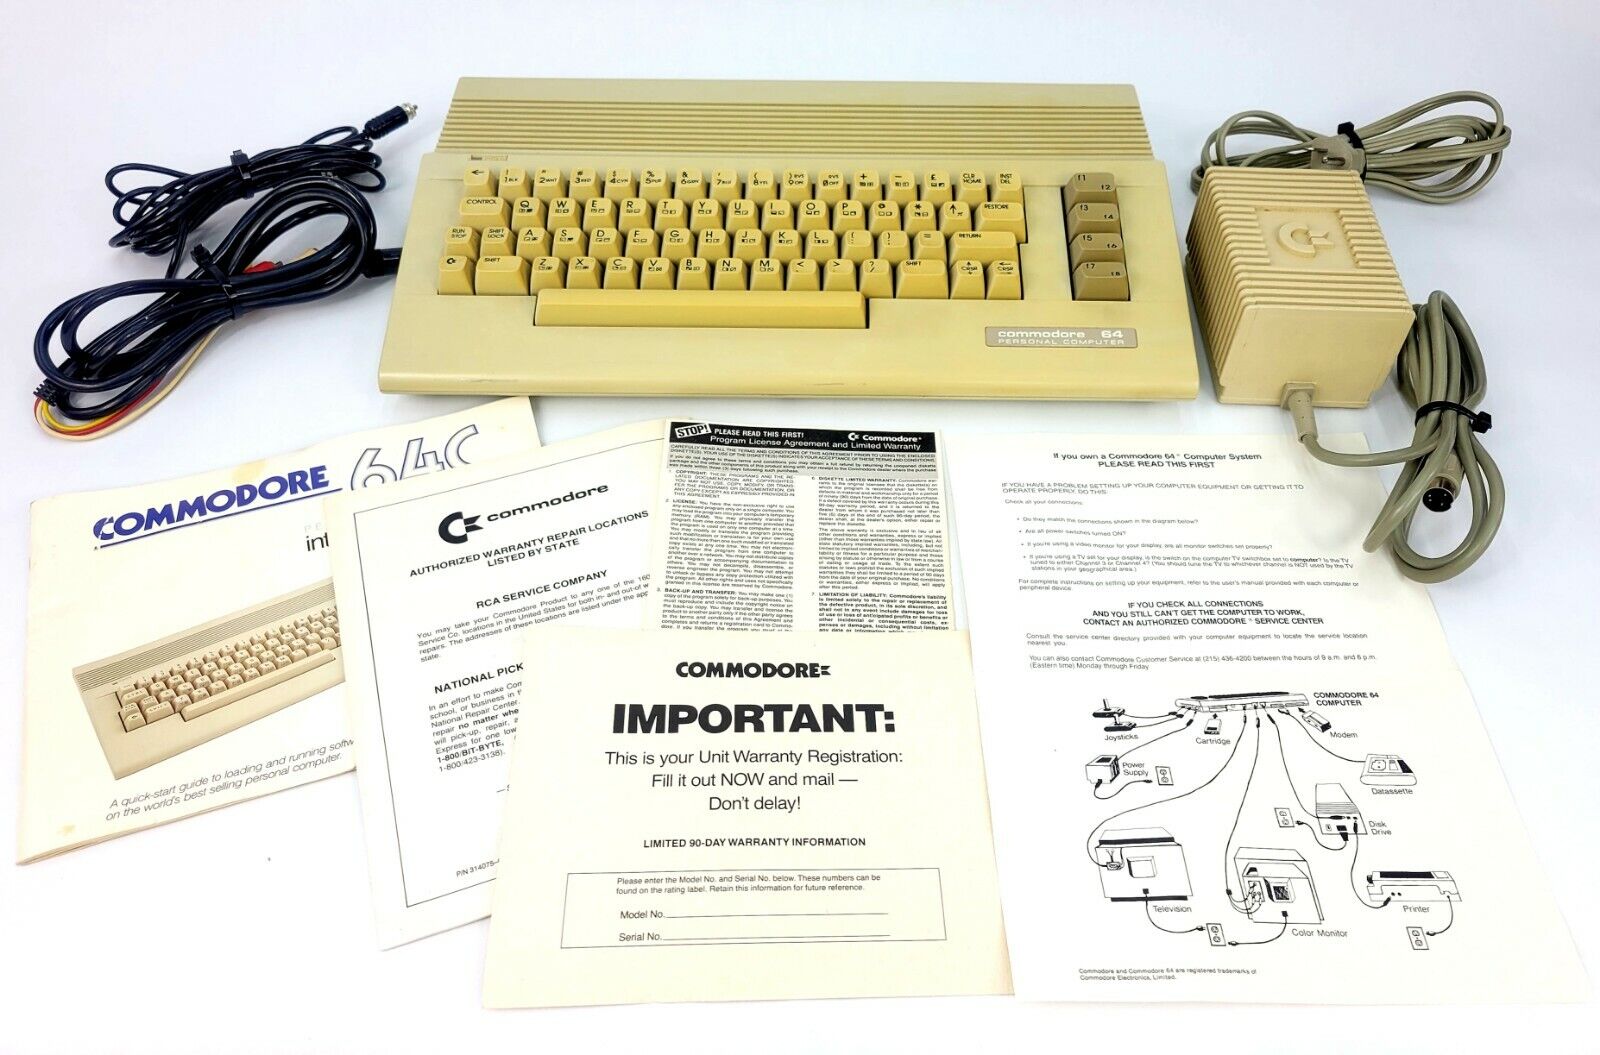 Vintage Commodore 64C Personal Computer w/Manuals & Power Supply - TESTED